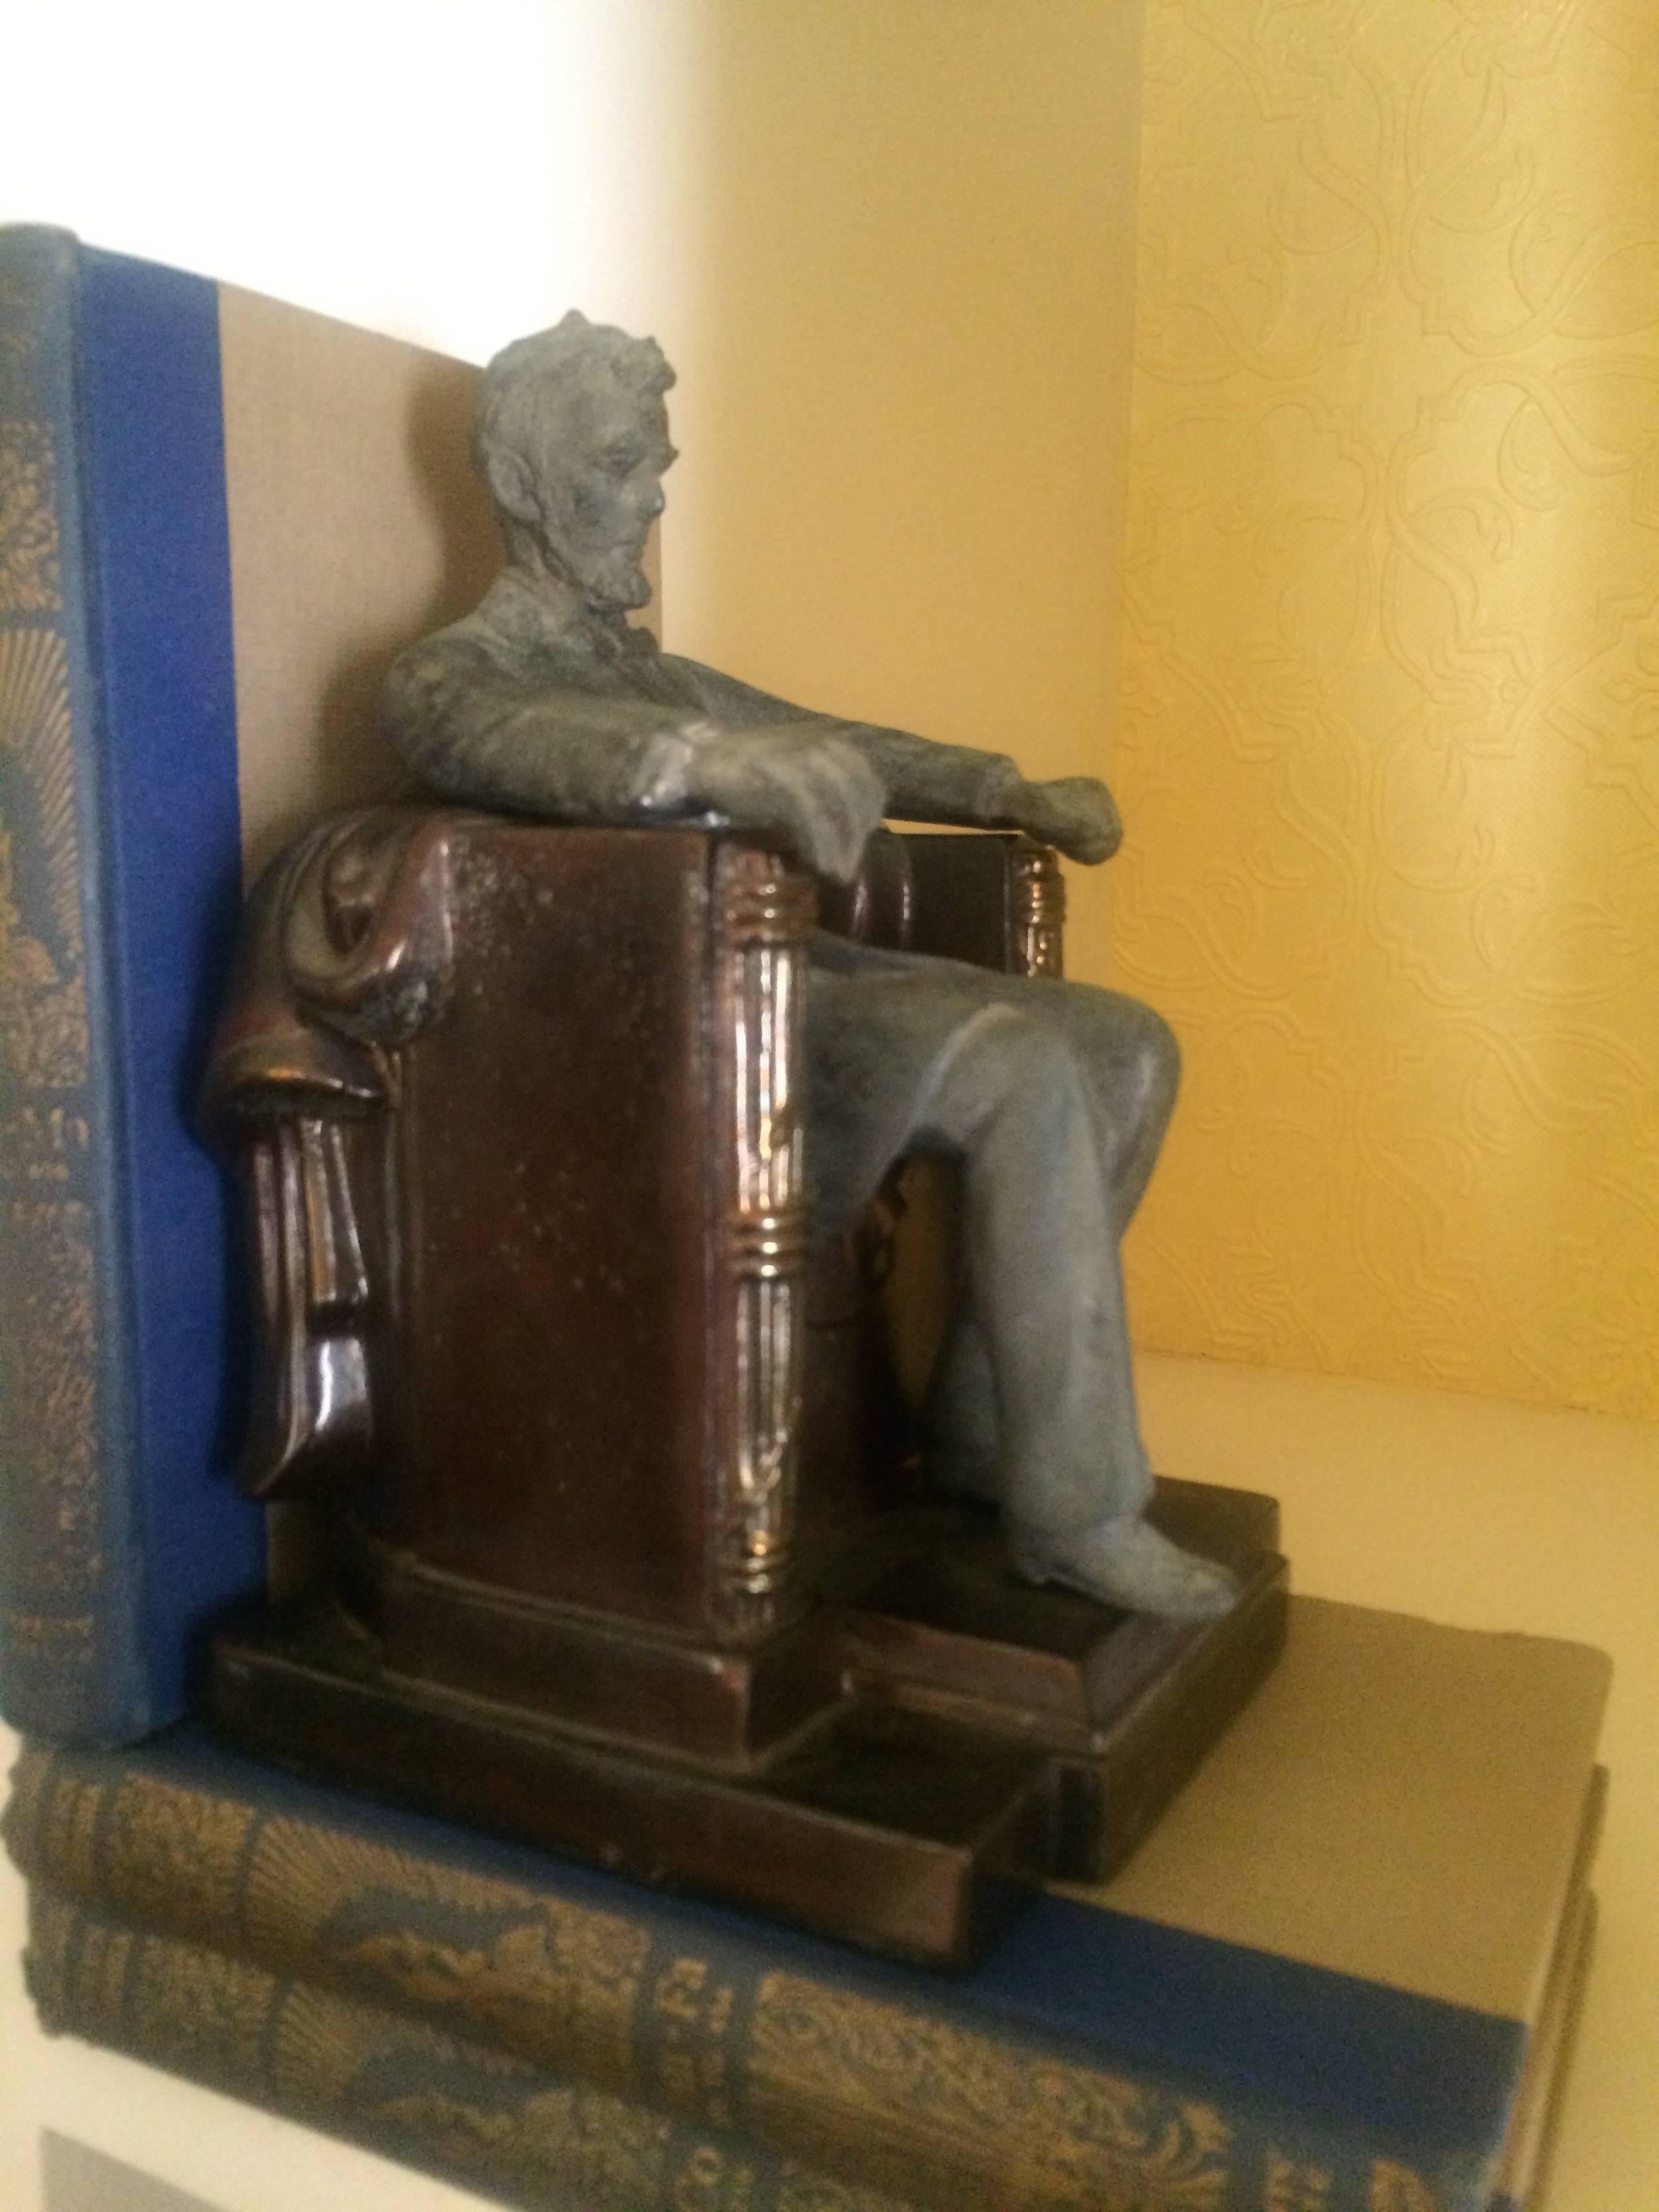 This very special Lincoln monument bookend is one bookend in two pieces. Lincoln actually can come out of the seat and keep you company elsewhere!

Metallic copper finish to Lincoln's stern and matte metal is a great book end in any case of